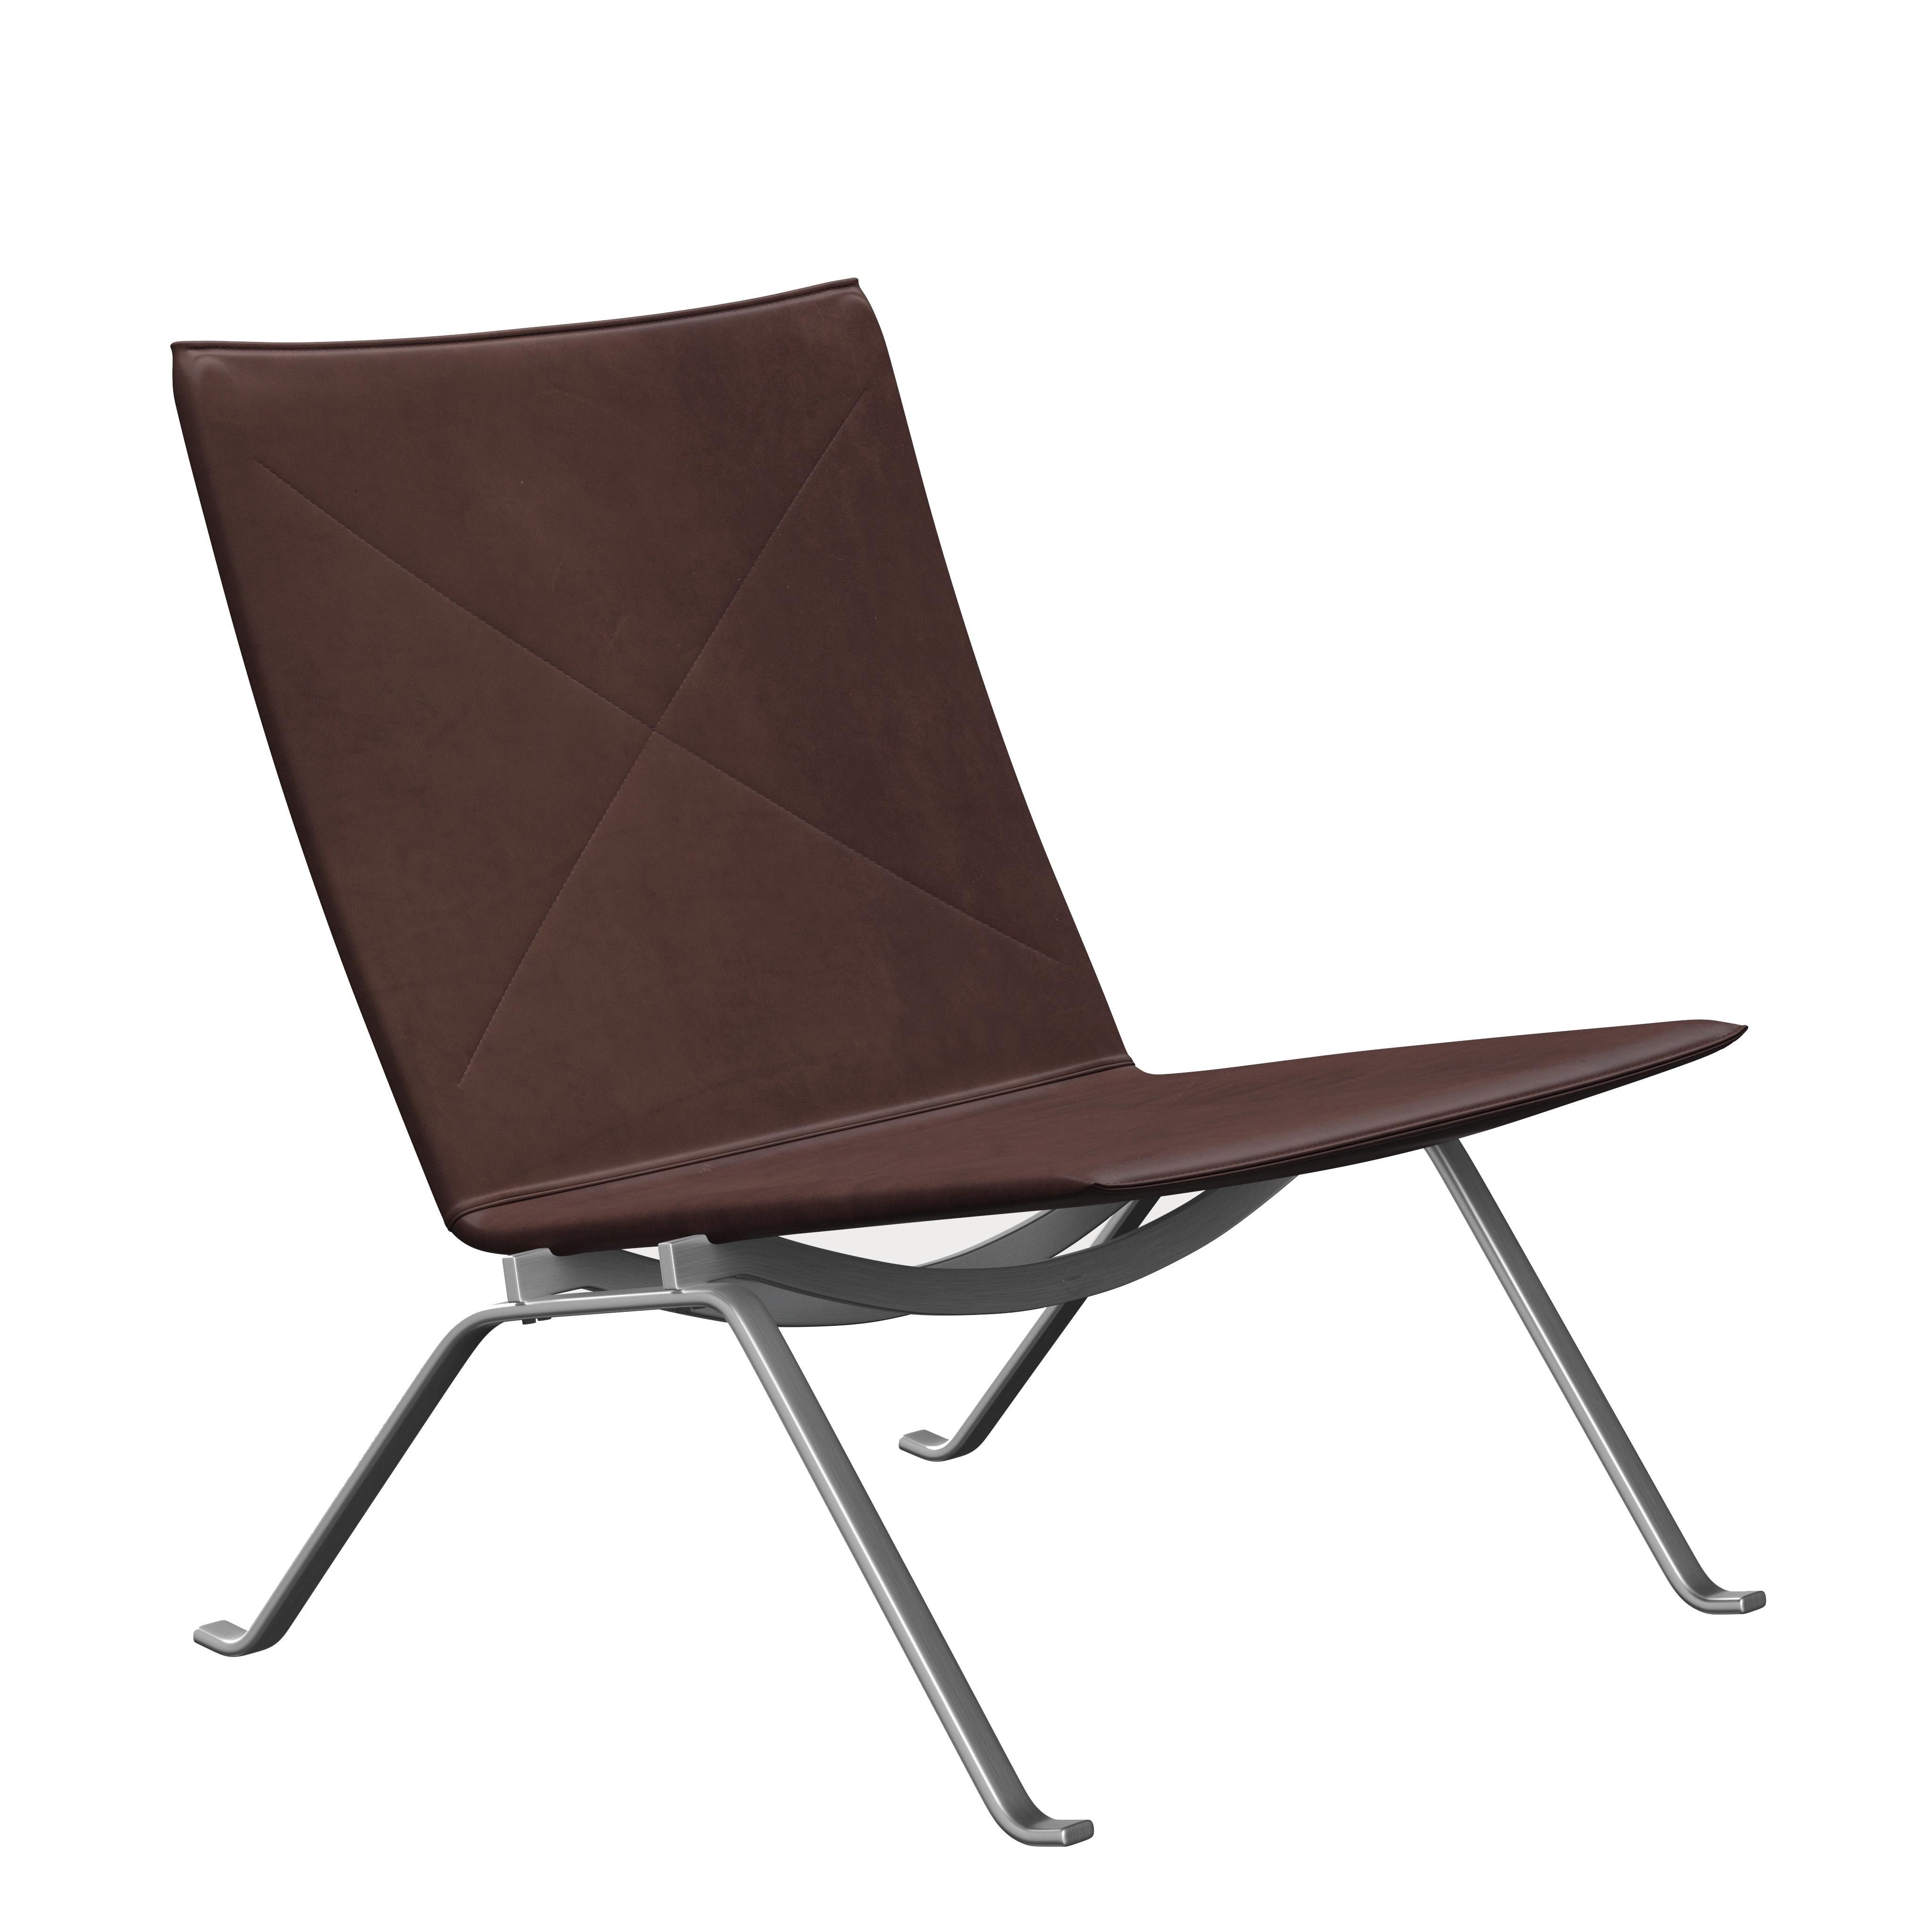 Poul Kjærholm 'PK22' Lounge Chair for Fritz Hansen in Leather (Cat. 5) For Sale 4